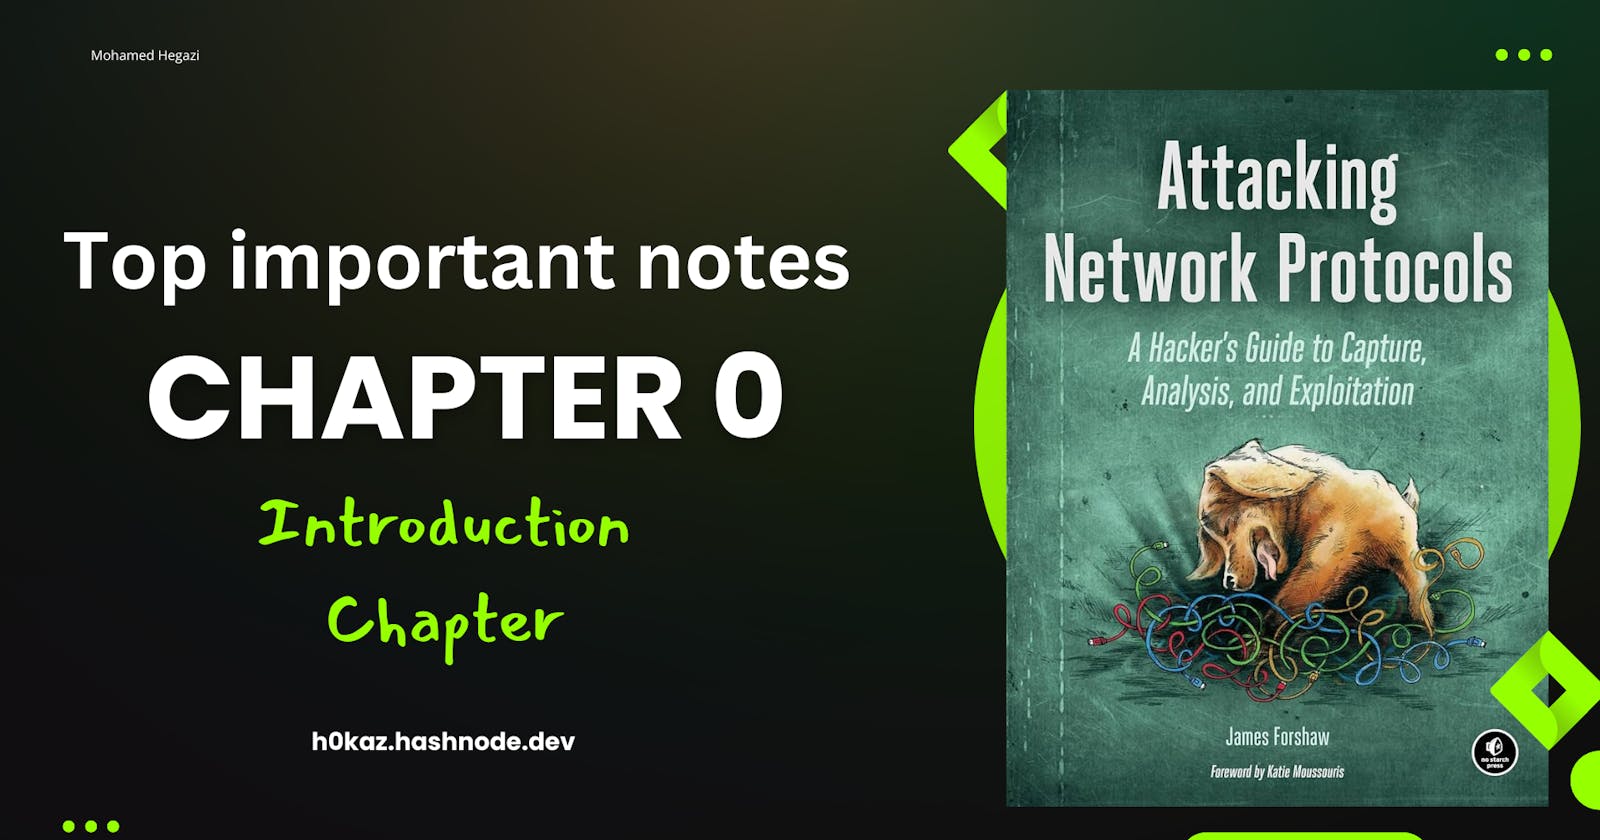 Chapter 0: Attacking Network Protocols Book Introduction